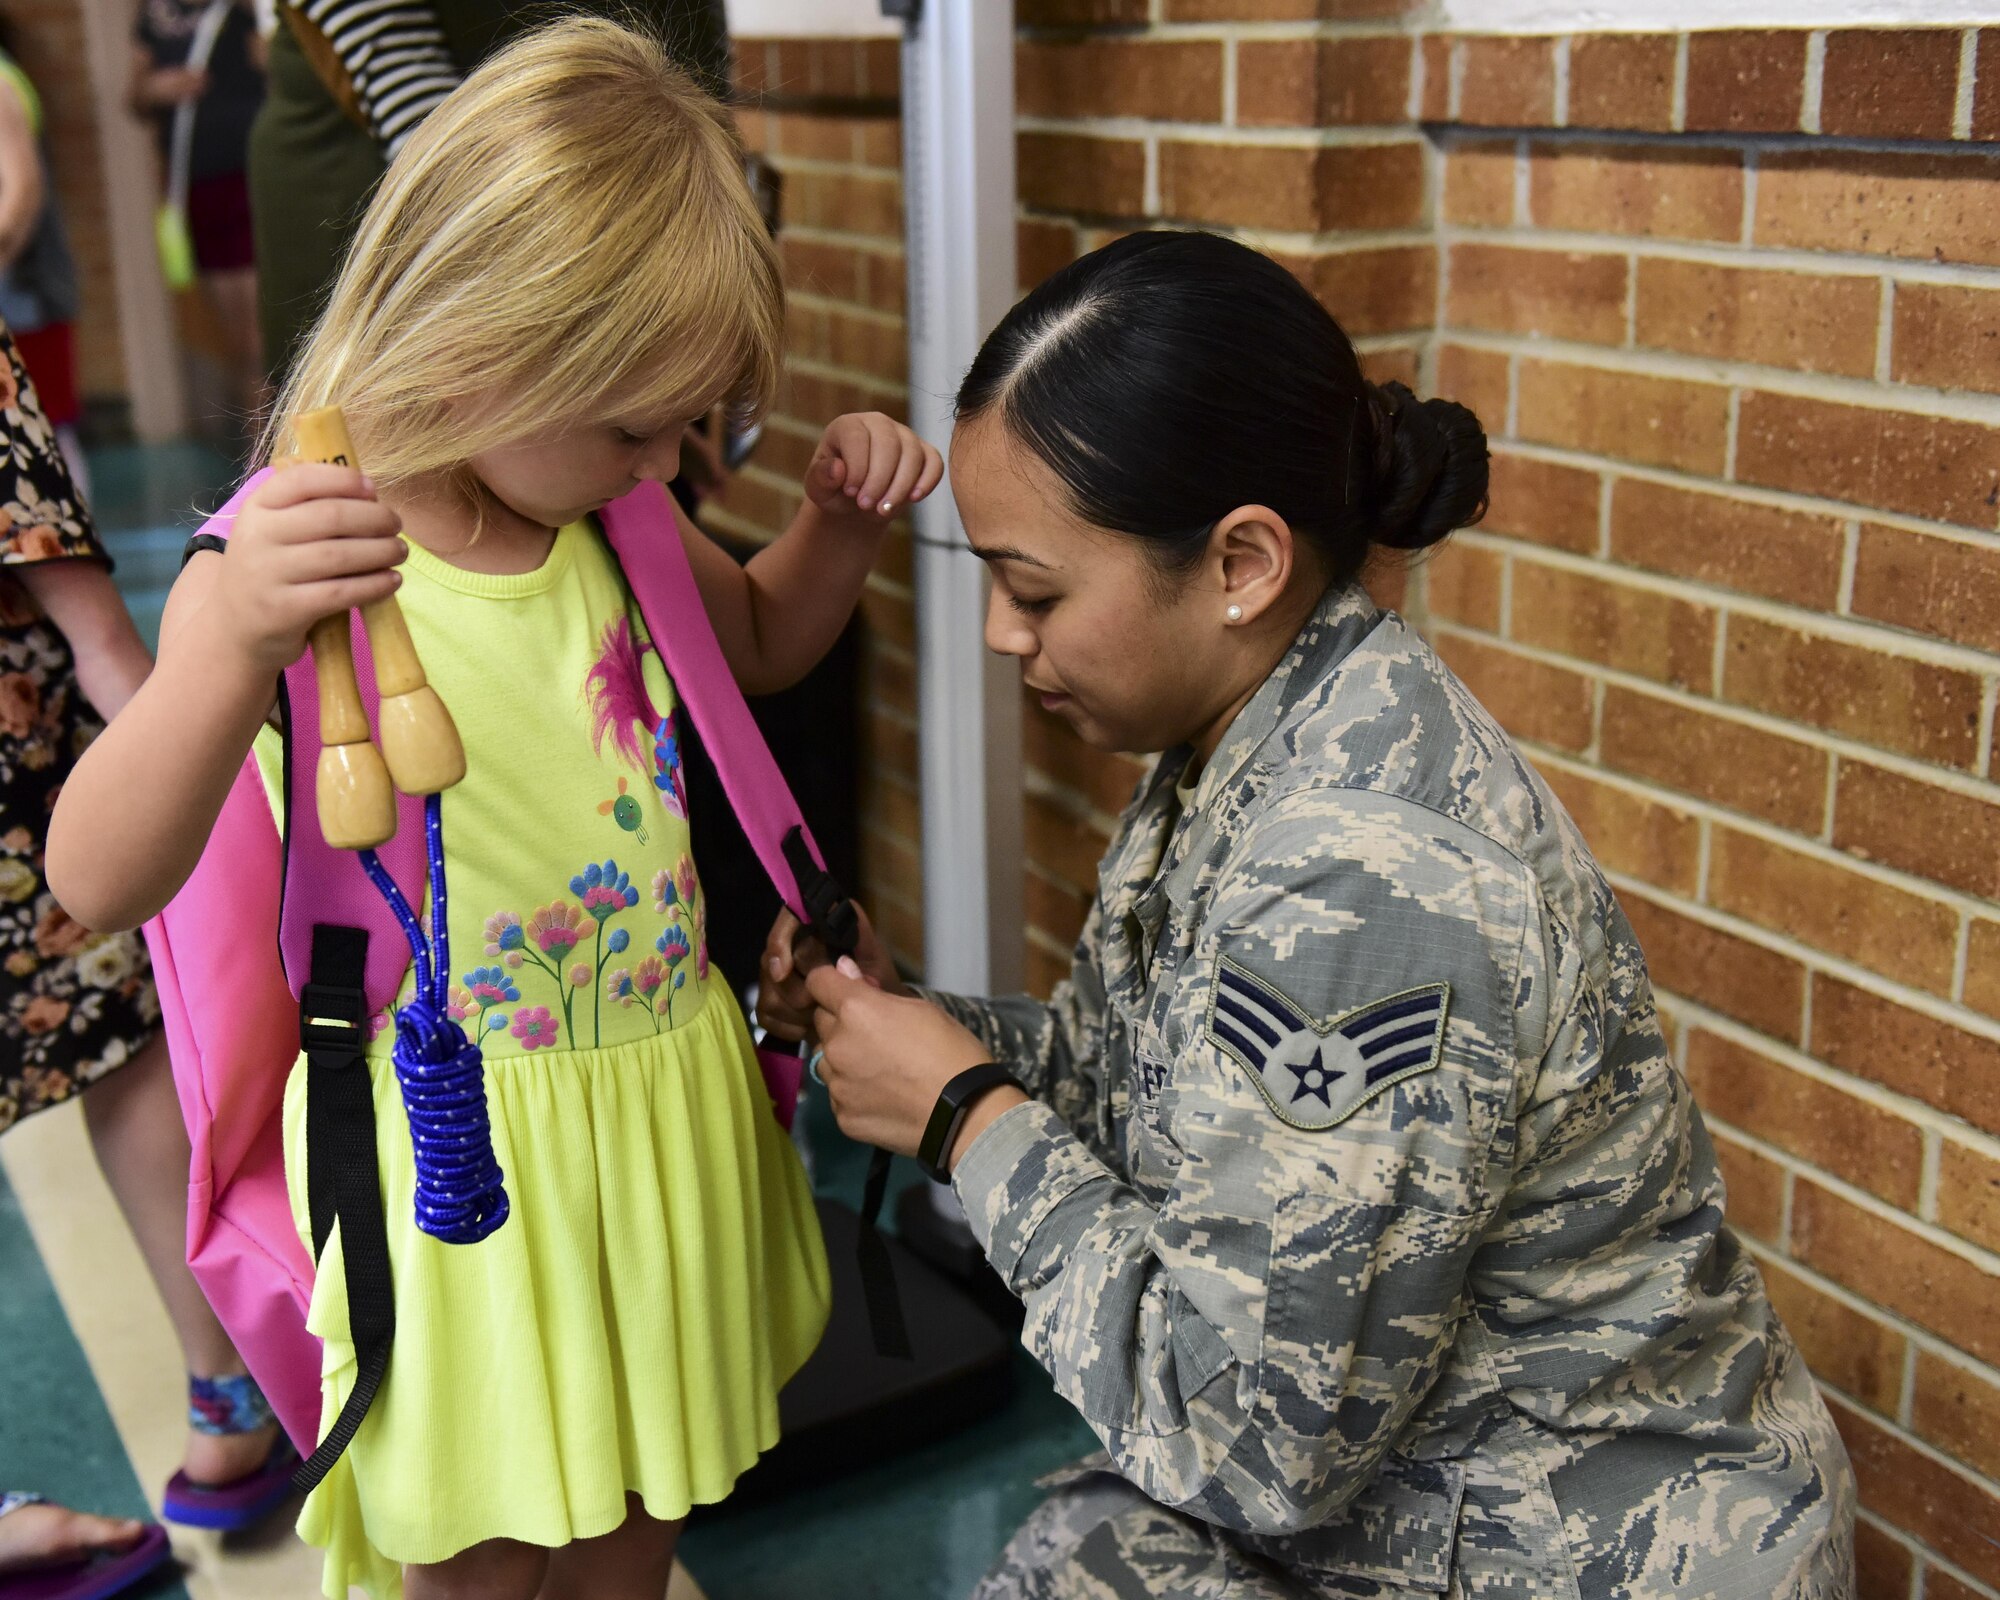 U.S. Air Force Senior Airman Tiffani-Amber Petit, a physical therapy technician with the 509th Medical Operations Squadron, right, helps adjust the backpack straps for Delilah Gordon, a pre-kindergarten student who is the daughter of Staff Sgt. Samuel Gordon, during the Back-to-School Brigade event at Whiteman Air Force Base, Mo., Aug. 8, 2017. Petit made sure the backpack fit comfortably and did not weigh more than 10 percent of the student’s bodyweight. (U.S. Air Force photo by Staff Sgt. Danielle Quilla)